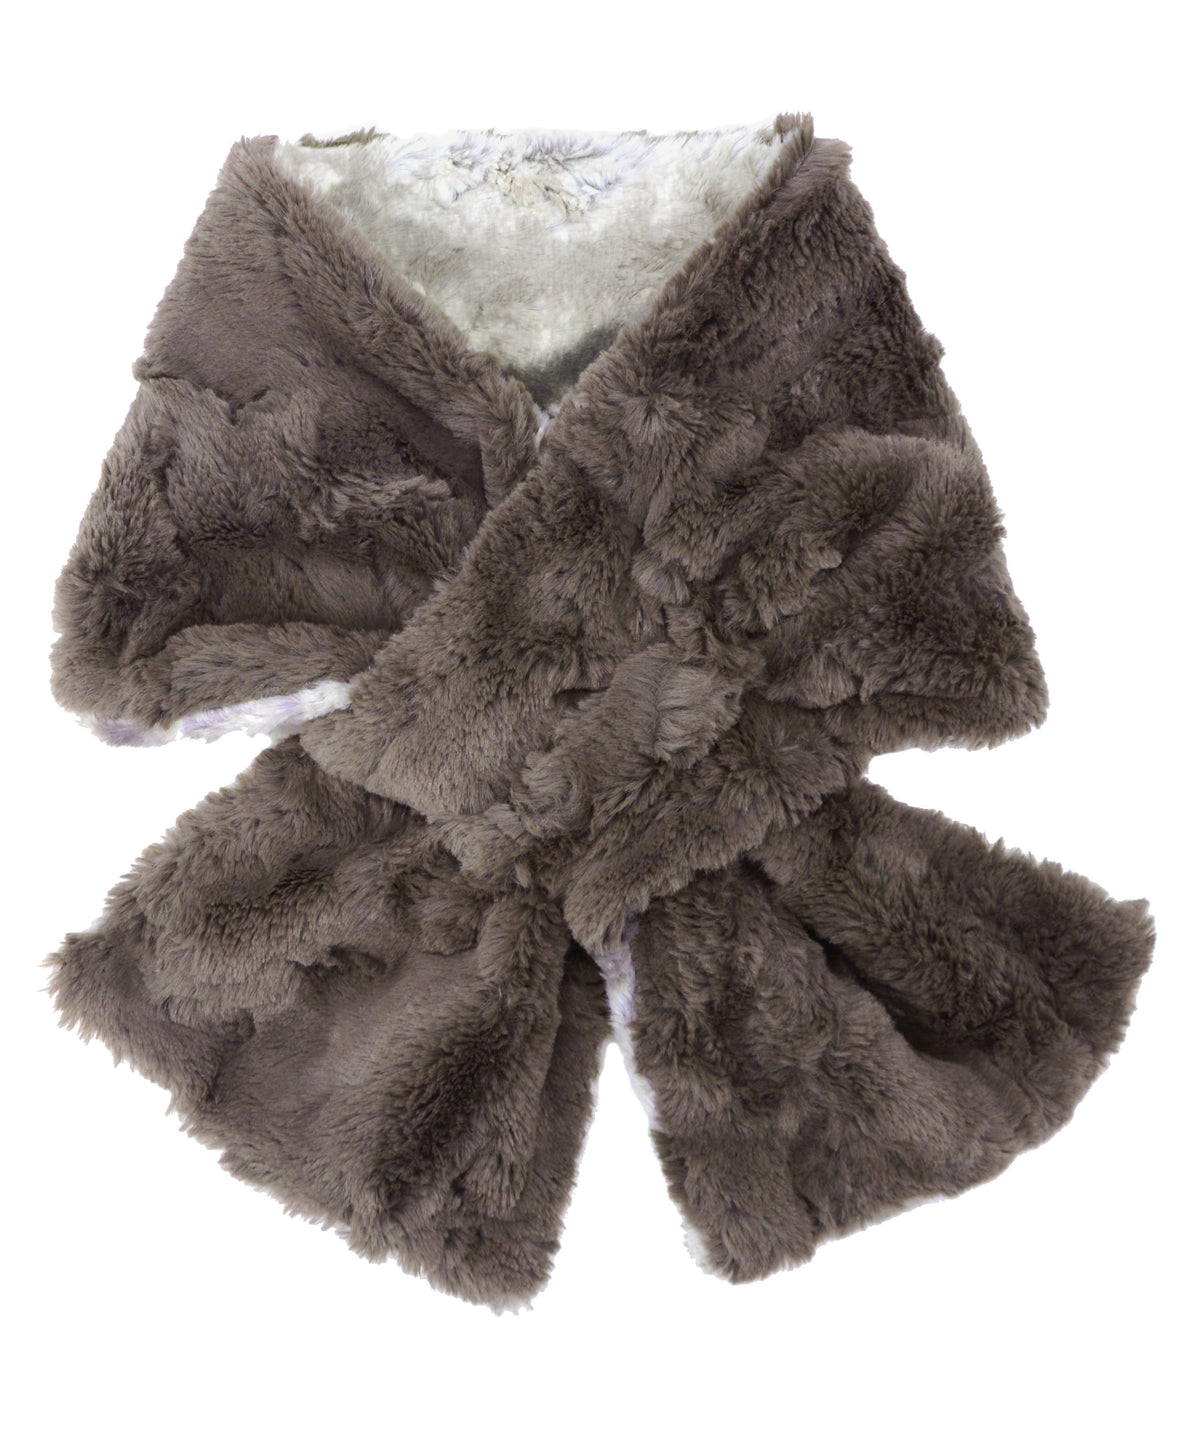 Pull Through Scarf in White Water Faux Fur with a Gray Reverse Handmade in Seattle, WA USA by Pandemonium Millinery